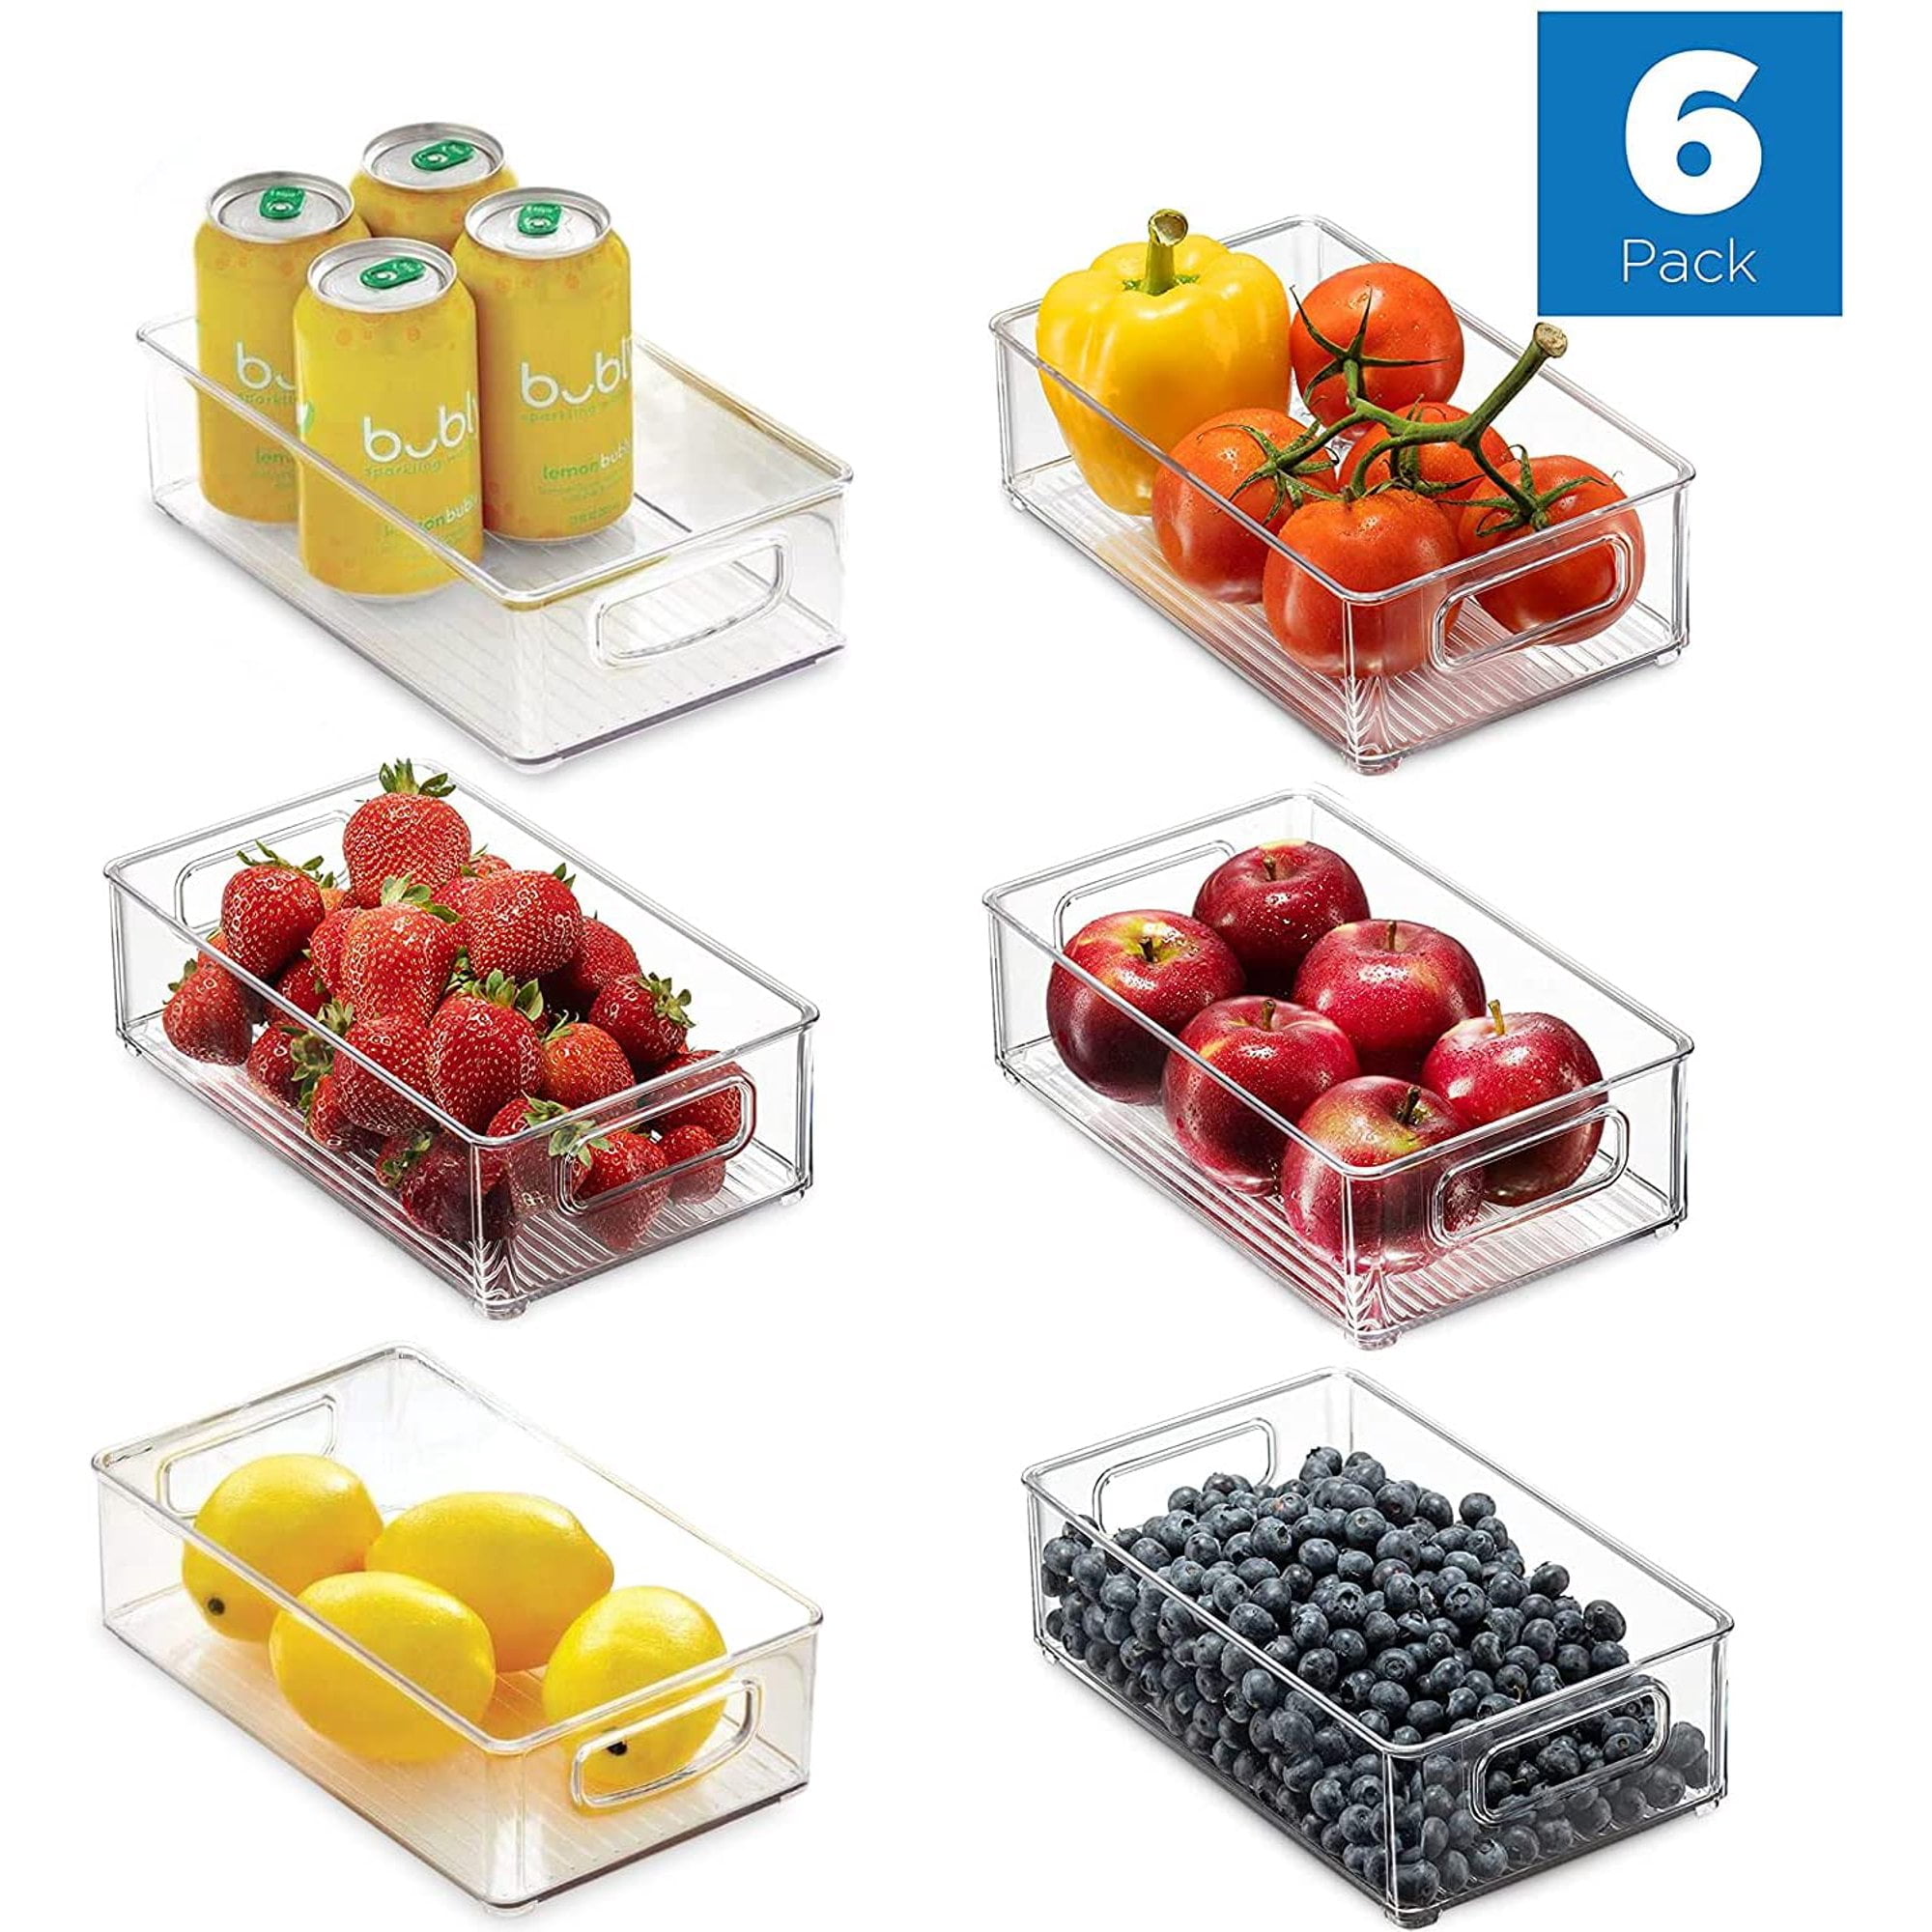 Slideep 11'' Large Food Storage Containers, Fridge Produce Saver 2 Tier  Stackable Refrigerator Organizer with Lids and Removable Drain Tray Drawers